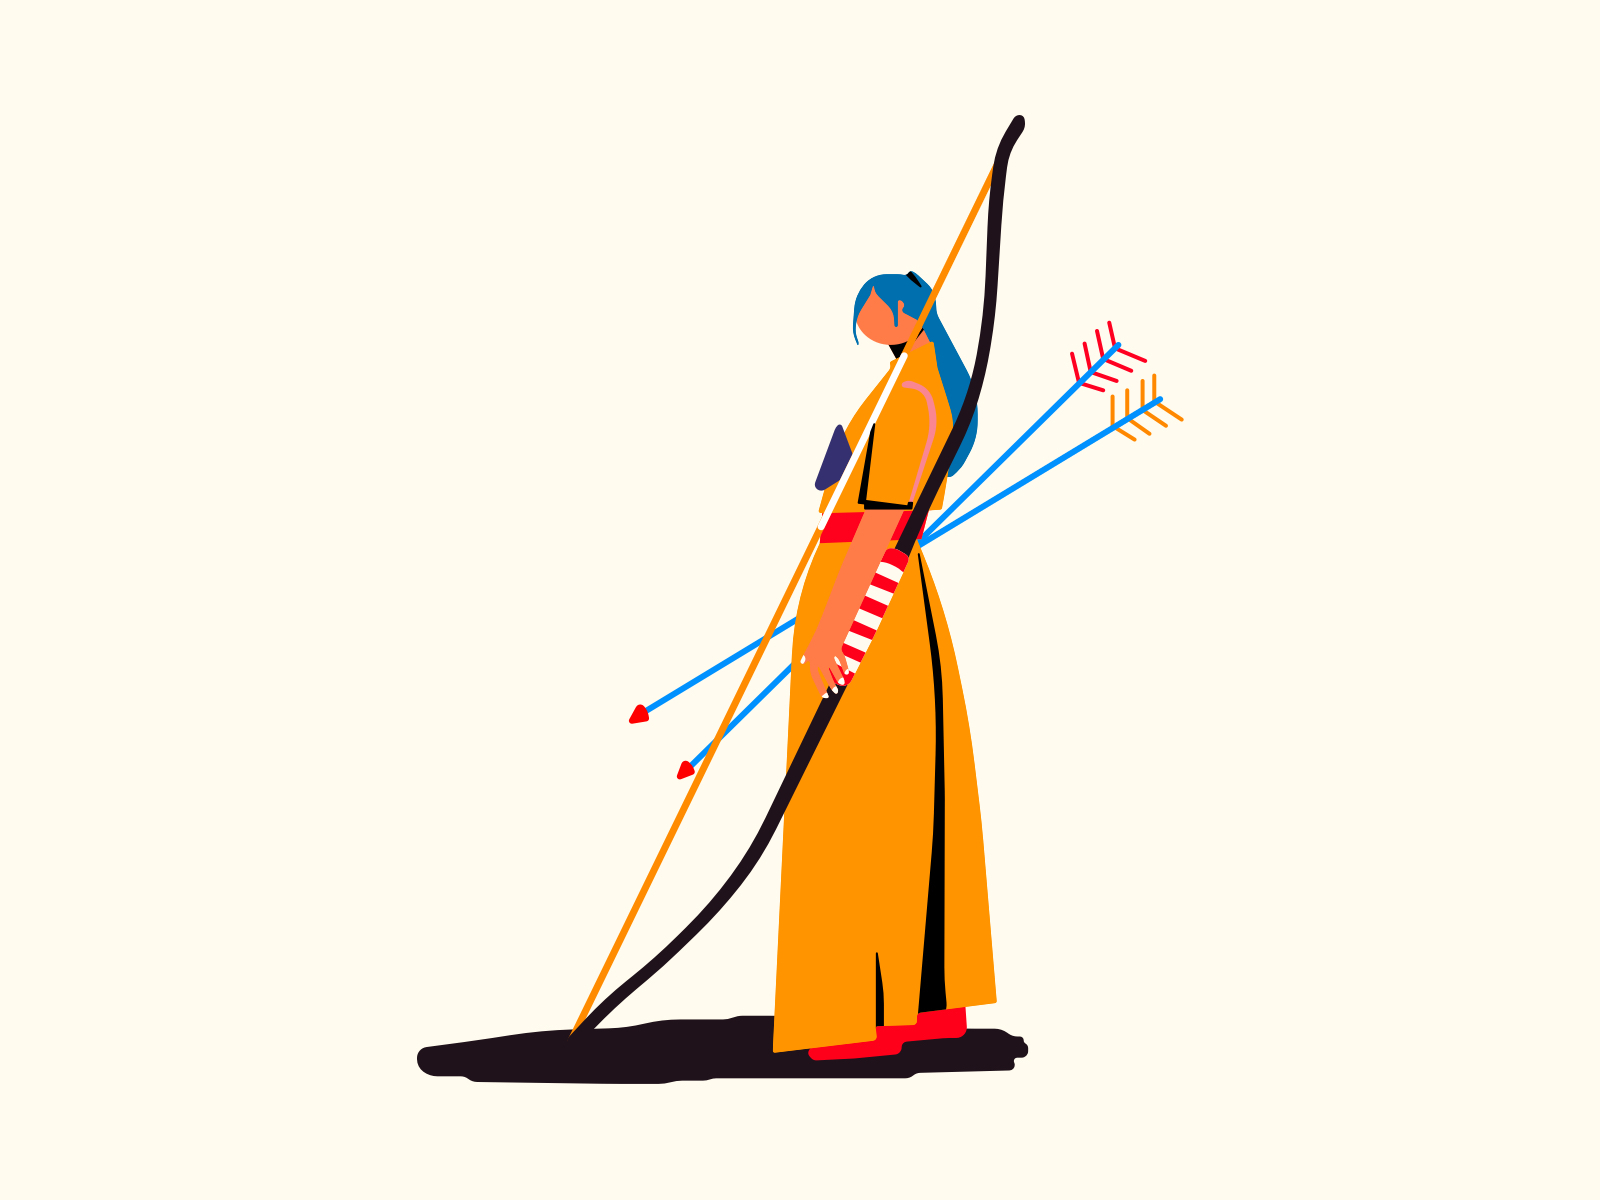 Bravery by Hasan on Dribbble